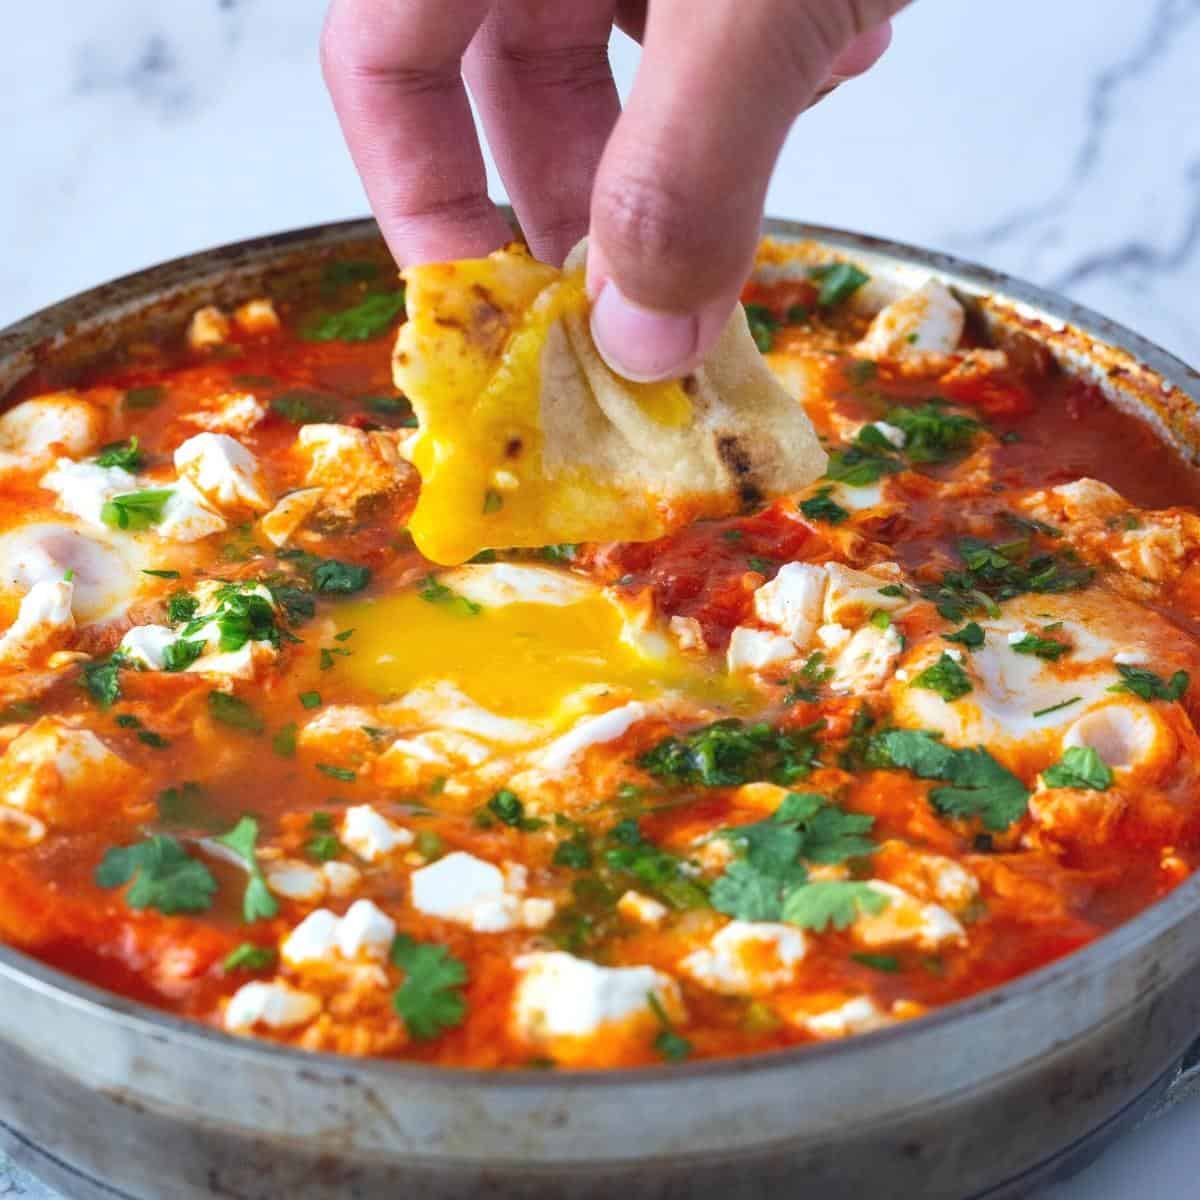 A large skillet with egg shakshooka and crumbled cheese.